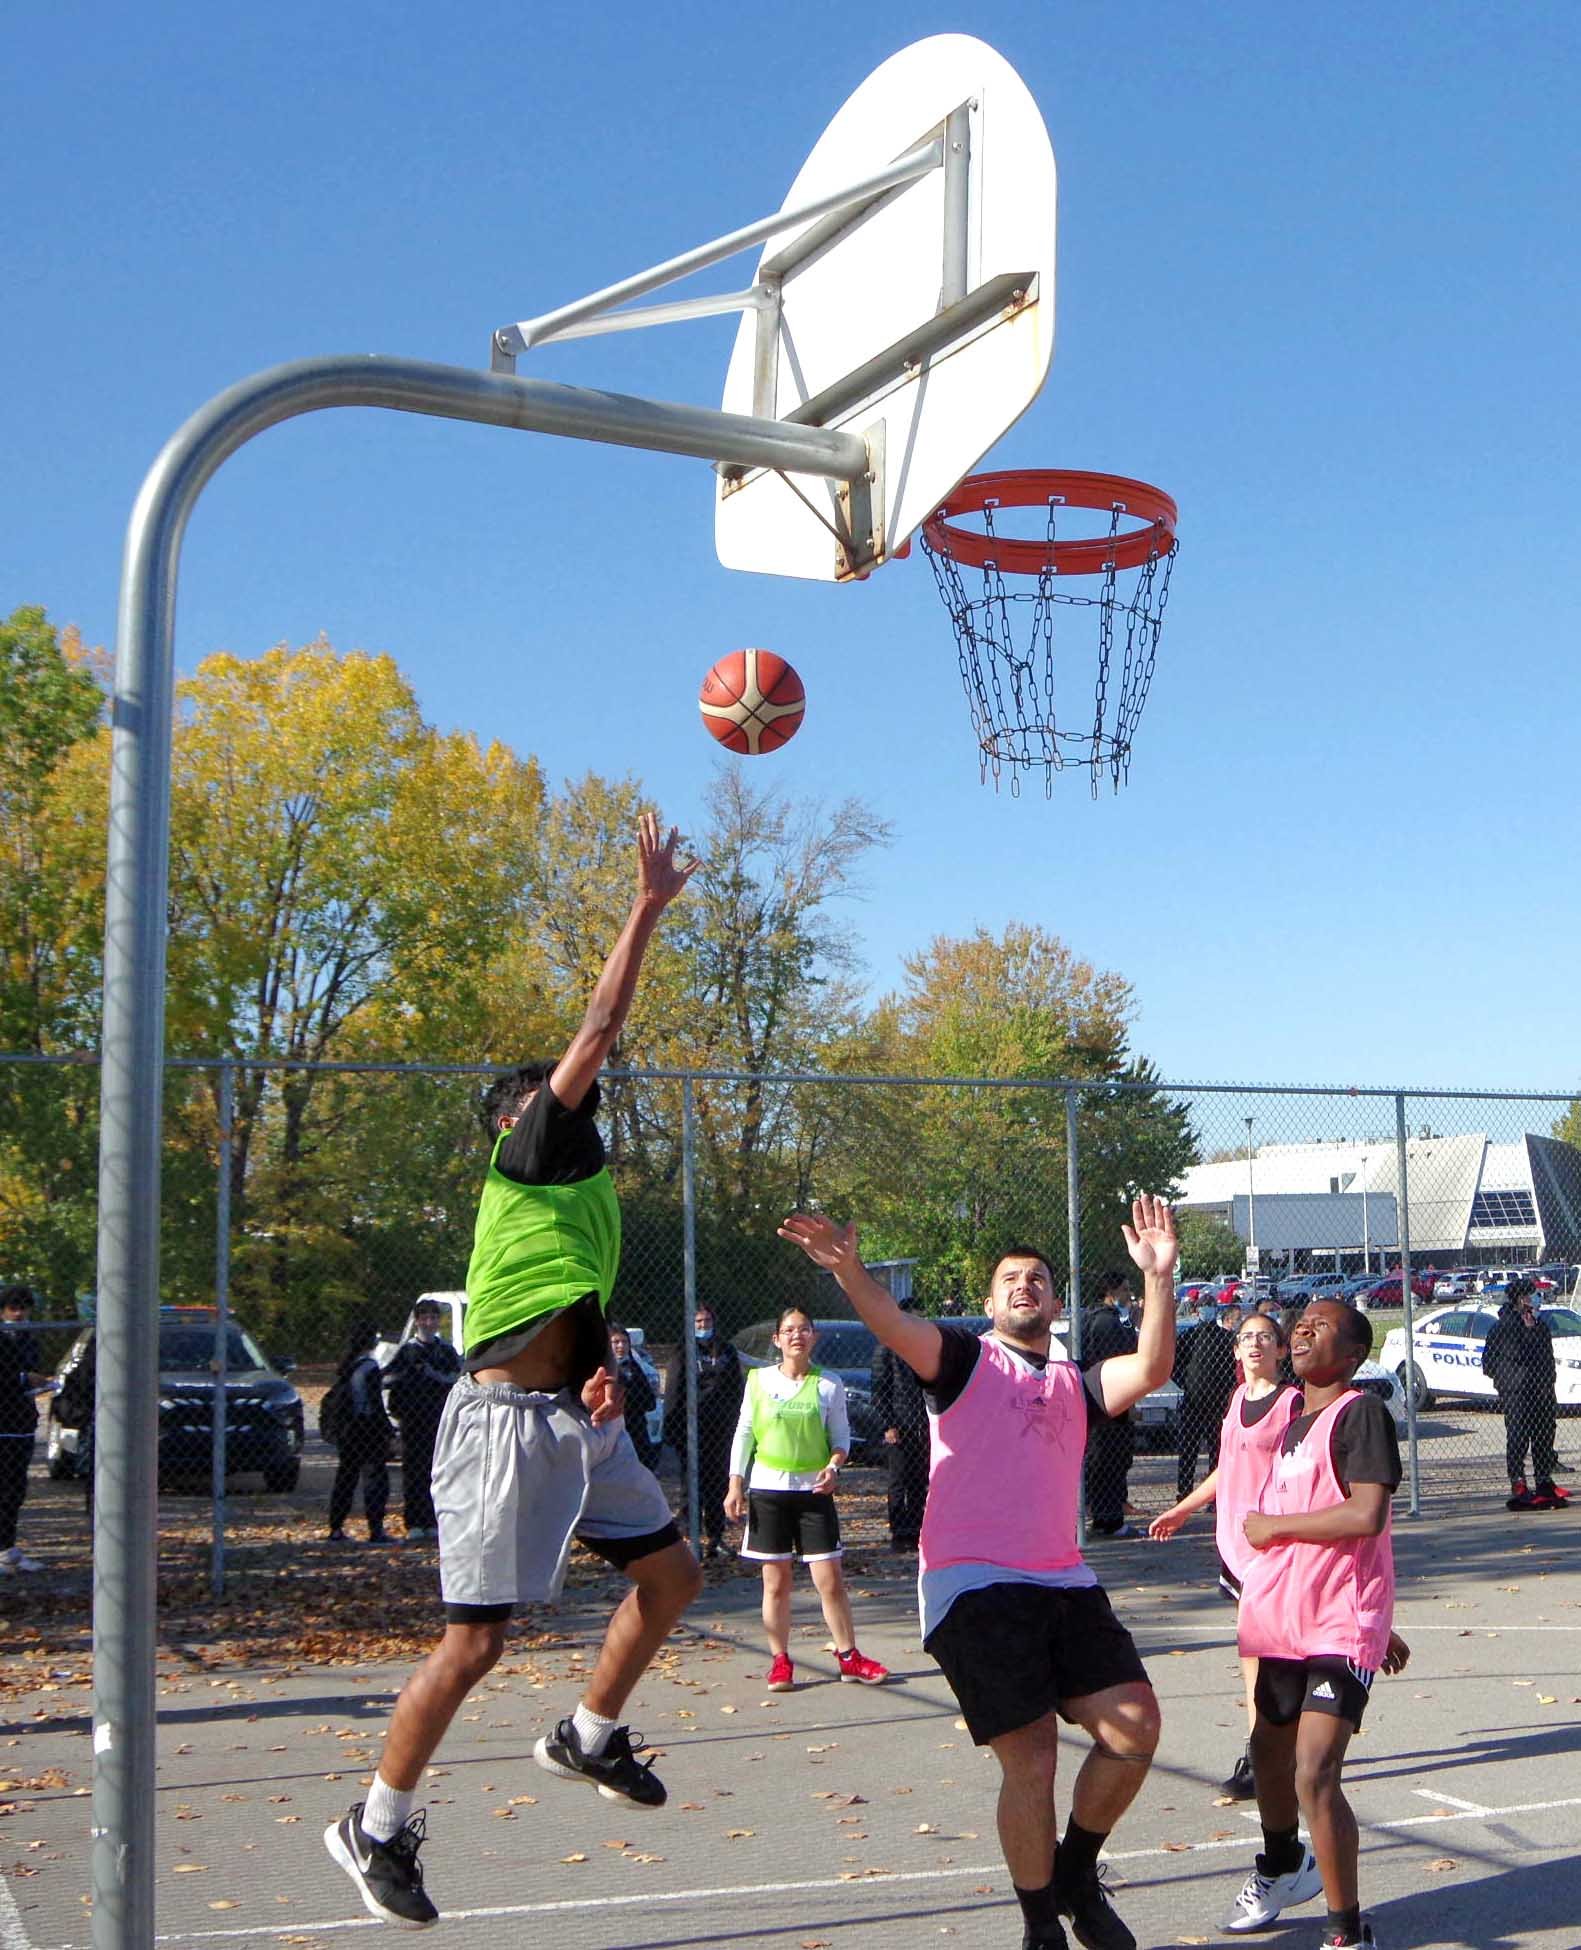 Laval Police and Saint-Maxime students connect on the basketball court